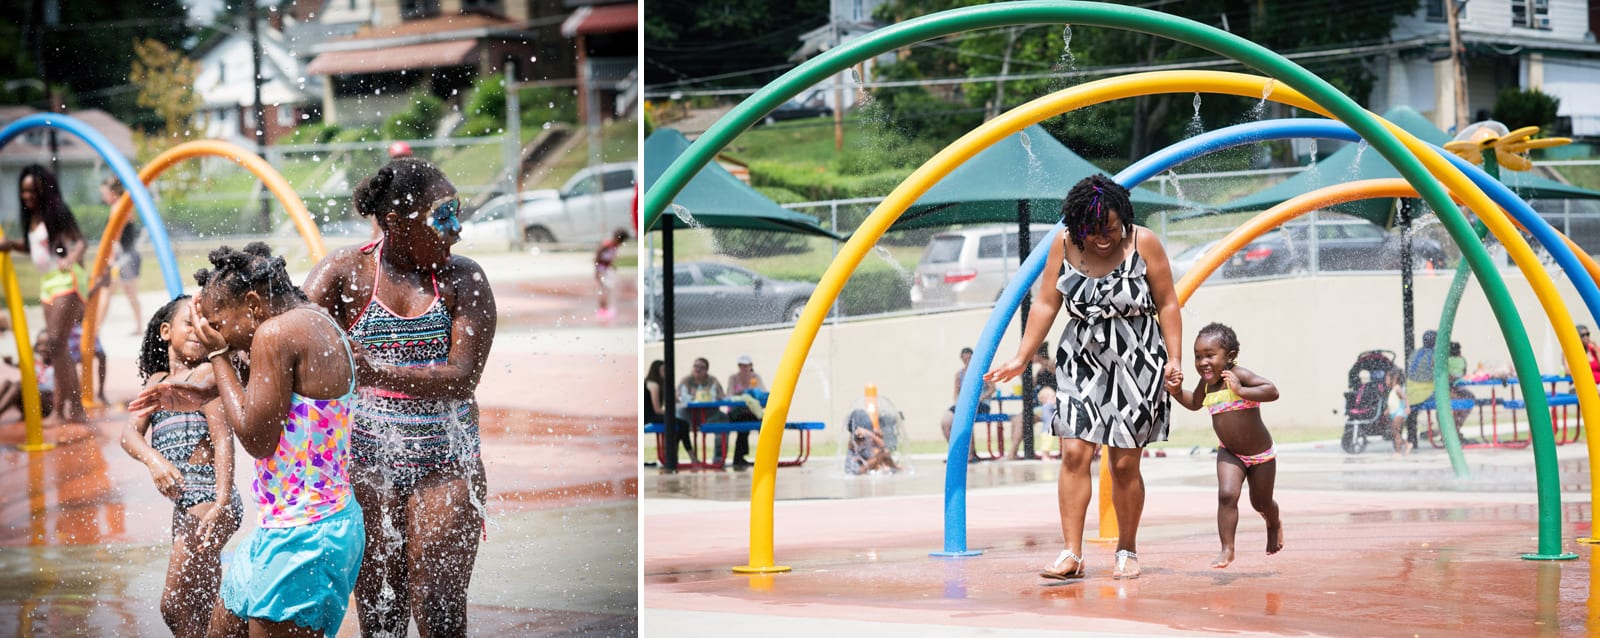 Kids and adults playing in a splash park in Hazelwood. Pittsburgh editorial event photographer.